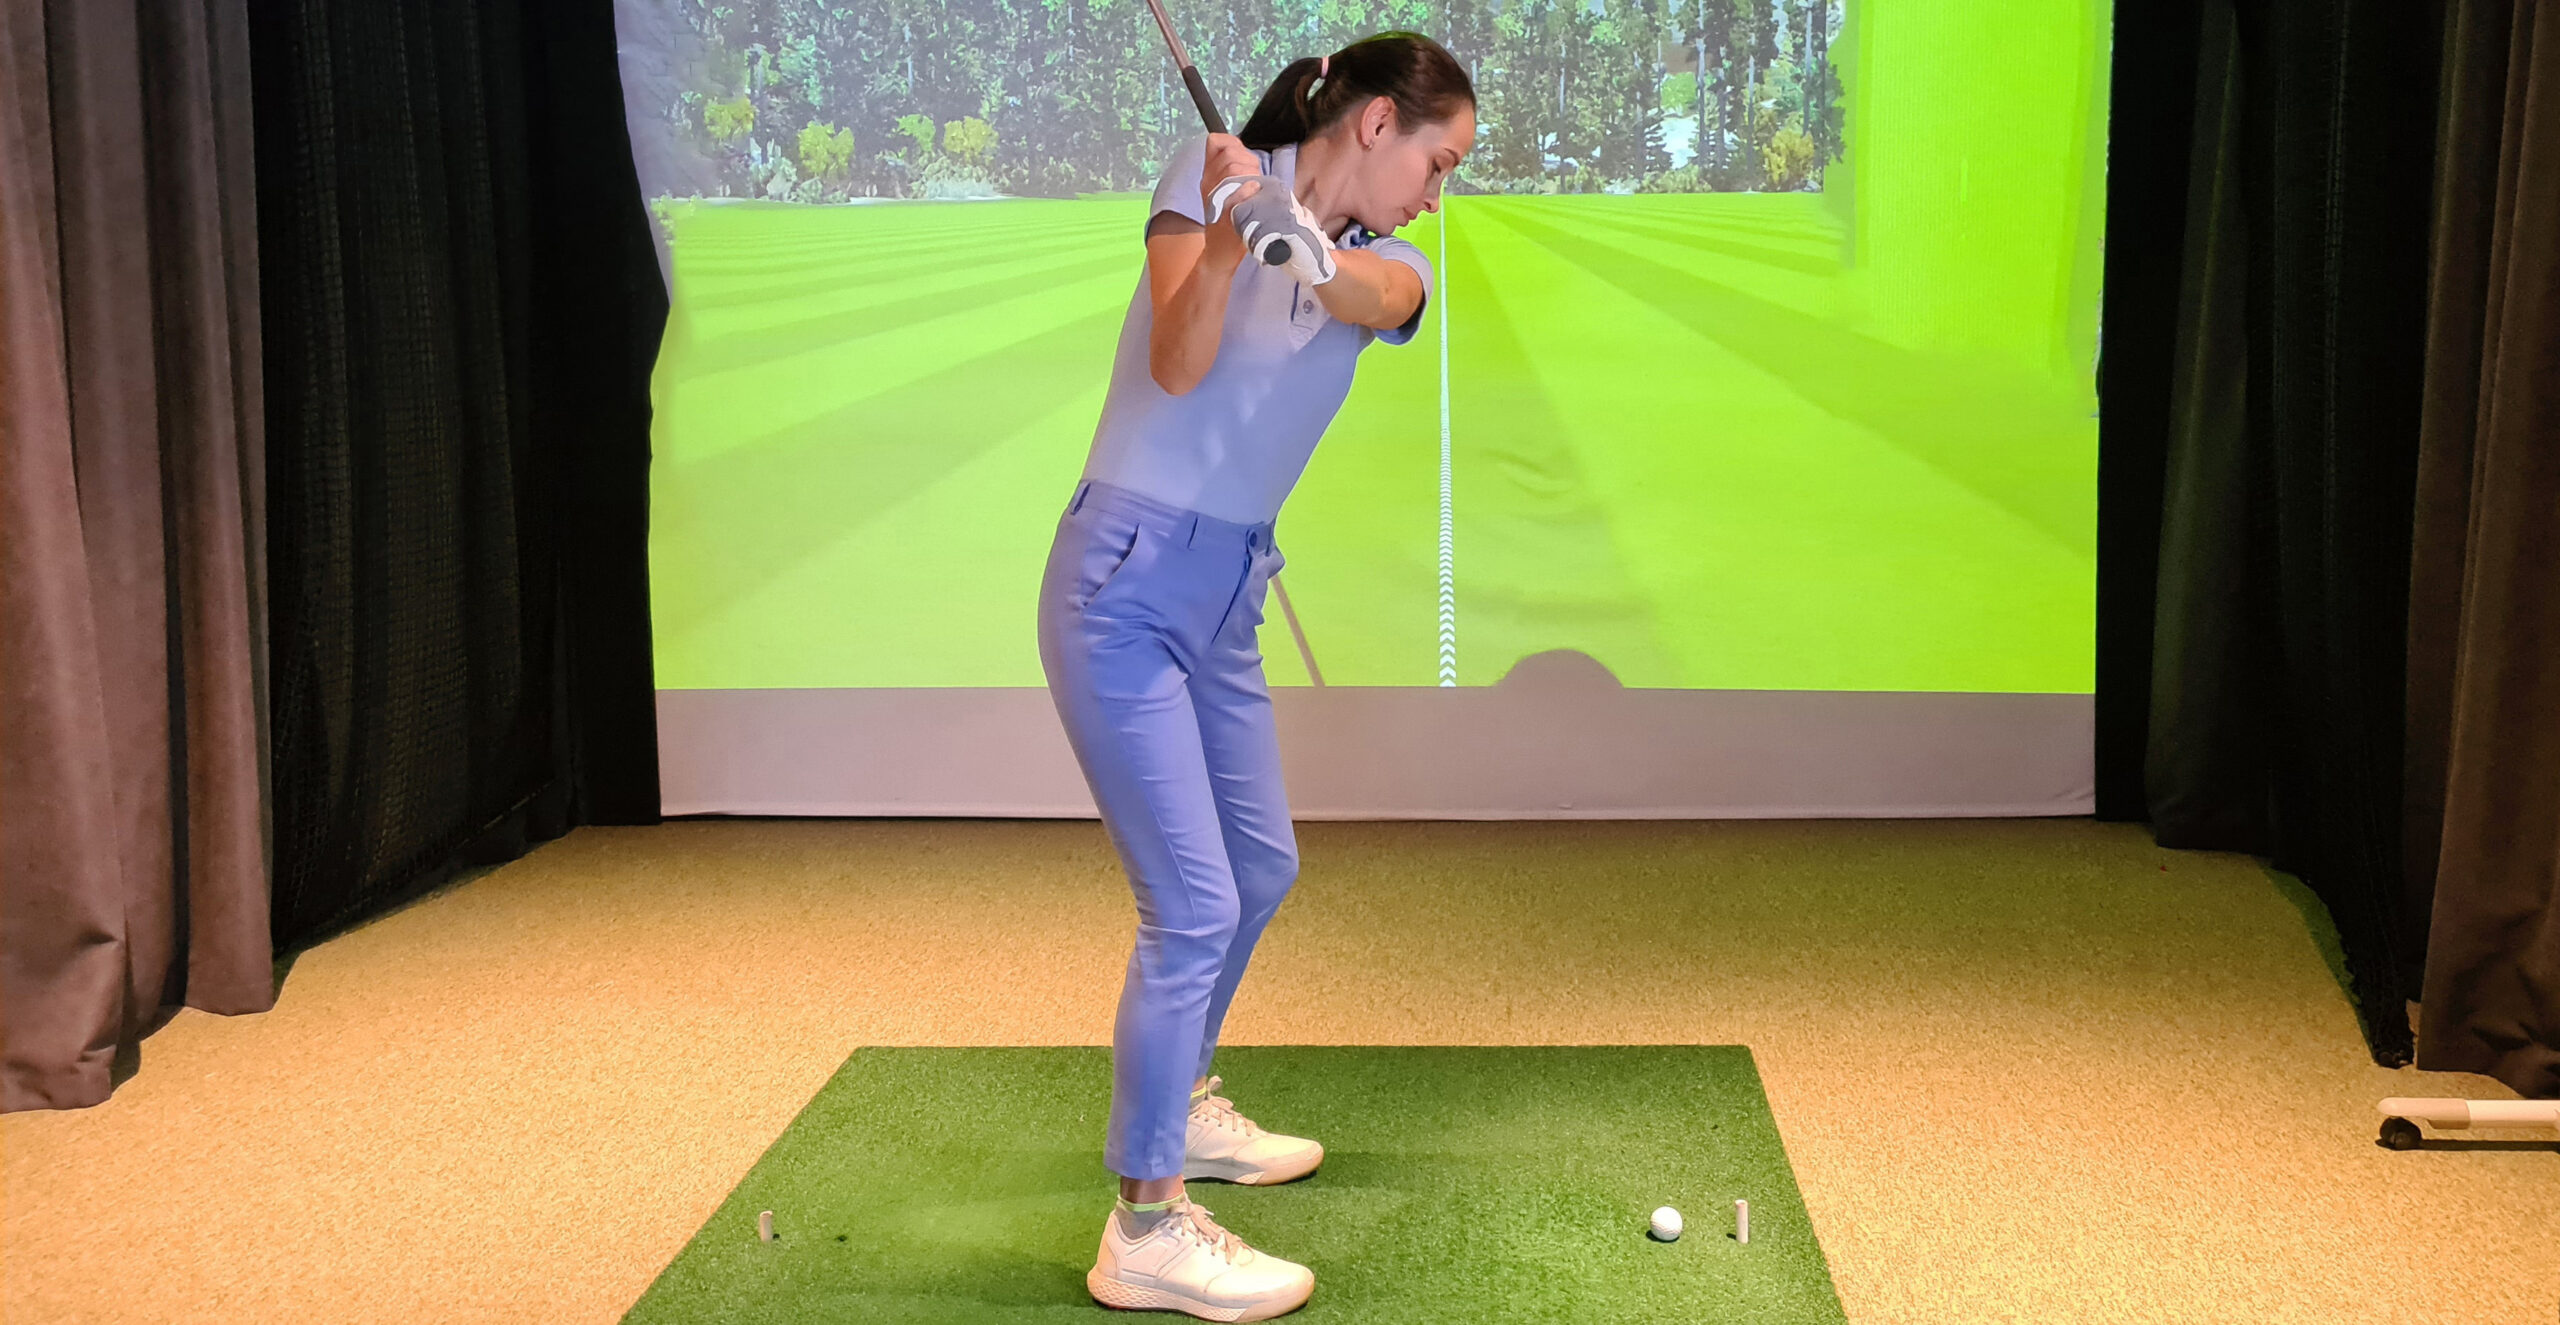 Woman playing golf on screen and golf simulator.